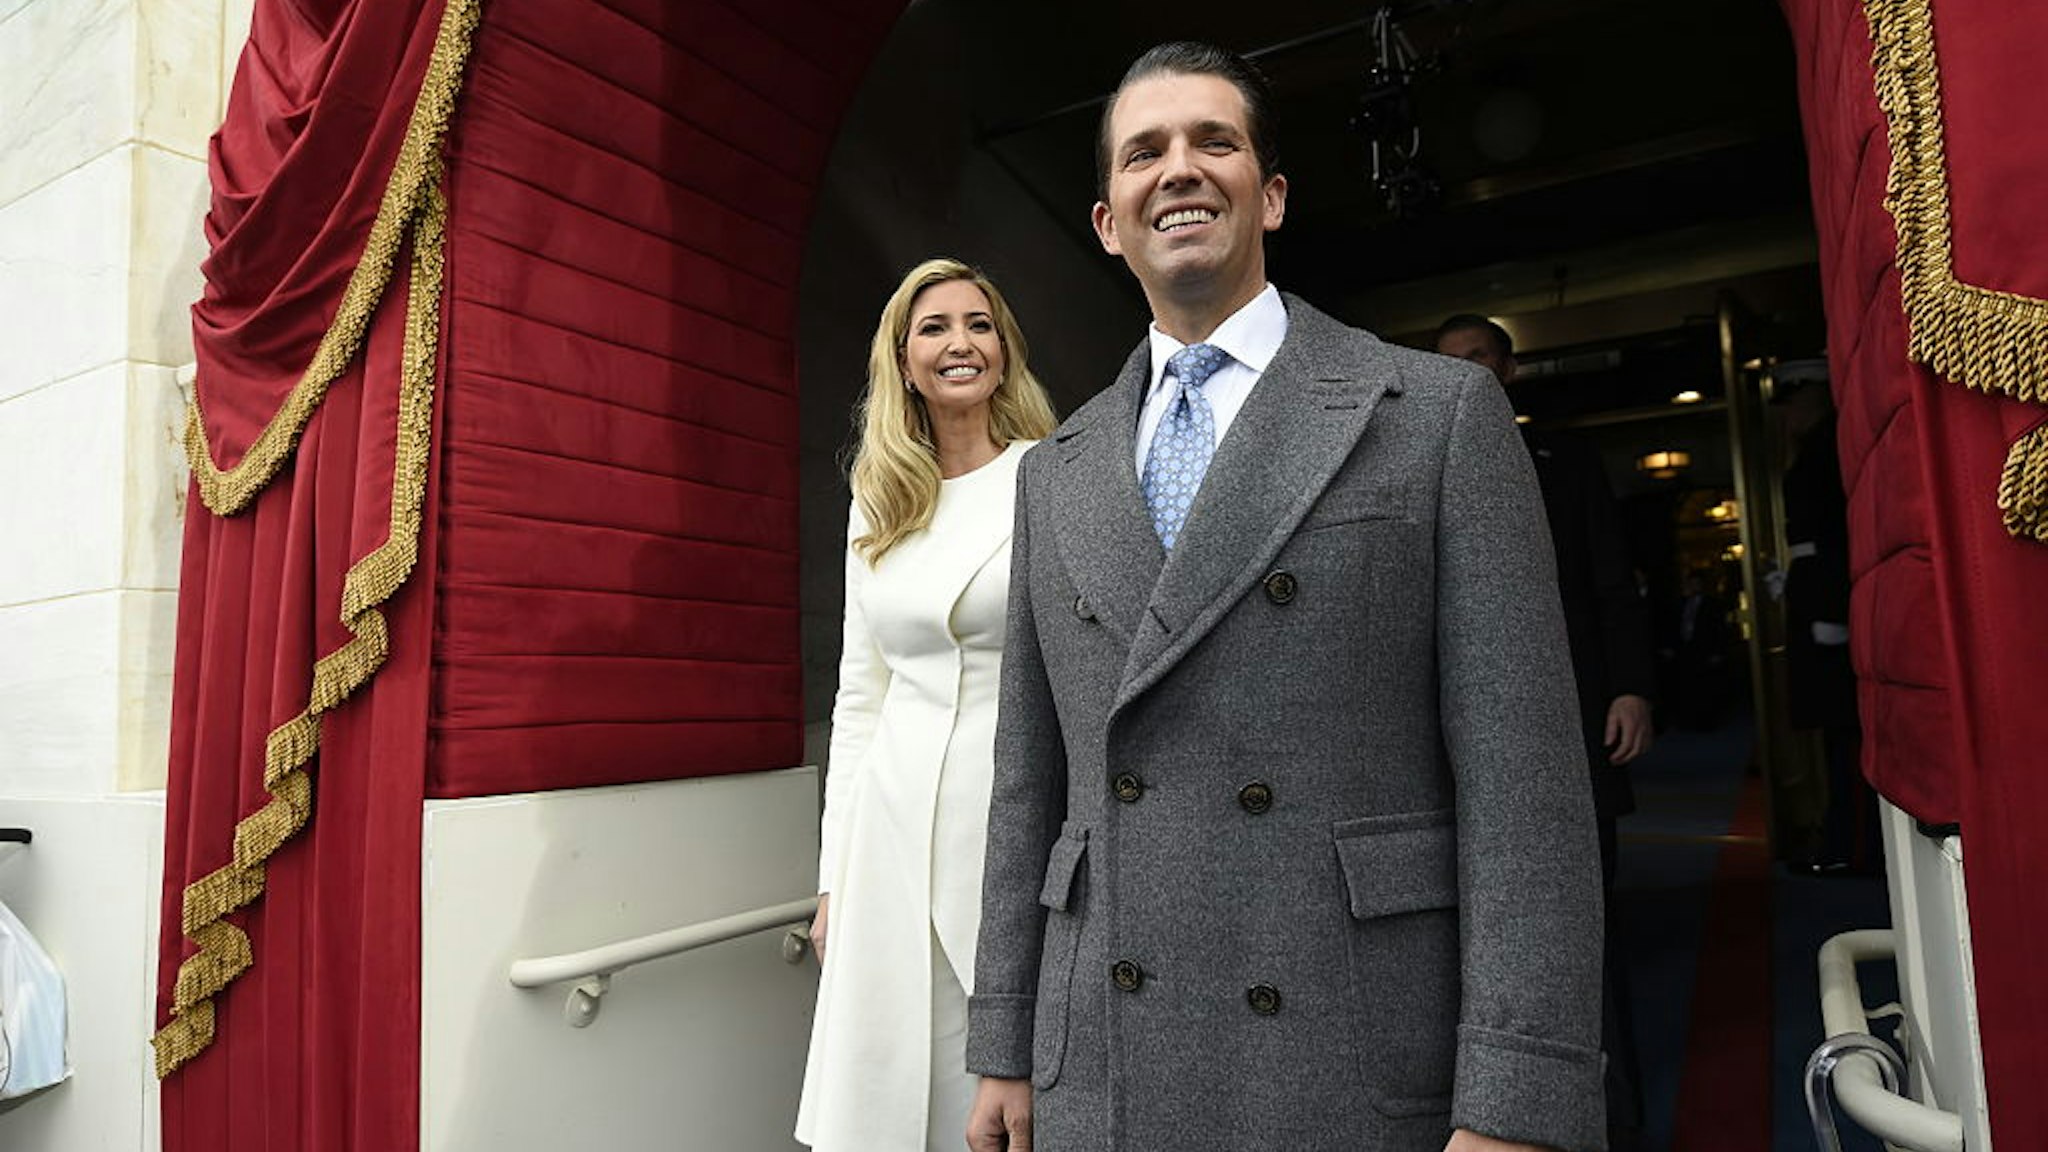 WASHINGTON, DC - JANUARY 20: Donald Trump, Jr., and Ivanka Trump arrive for the Presidential Inauguration of their father Donald Trump at the US Capitol on January 20, 2017 in Washington, DC. Donald J. Trump will become the 45th president of the United States today. (Photo by Saul Loeb - Pool/Getty Images)